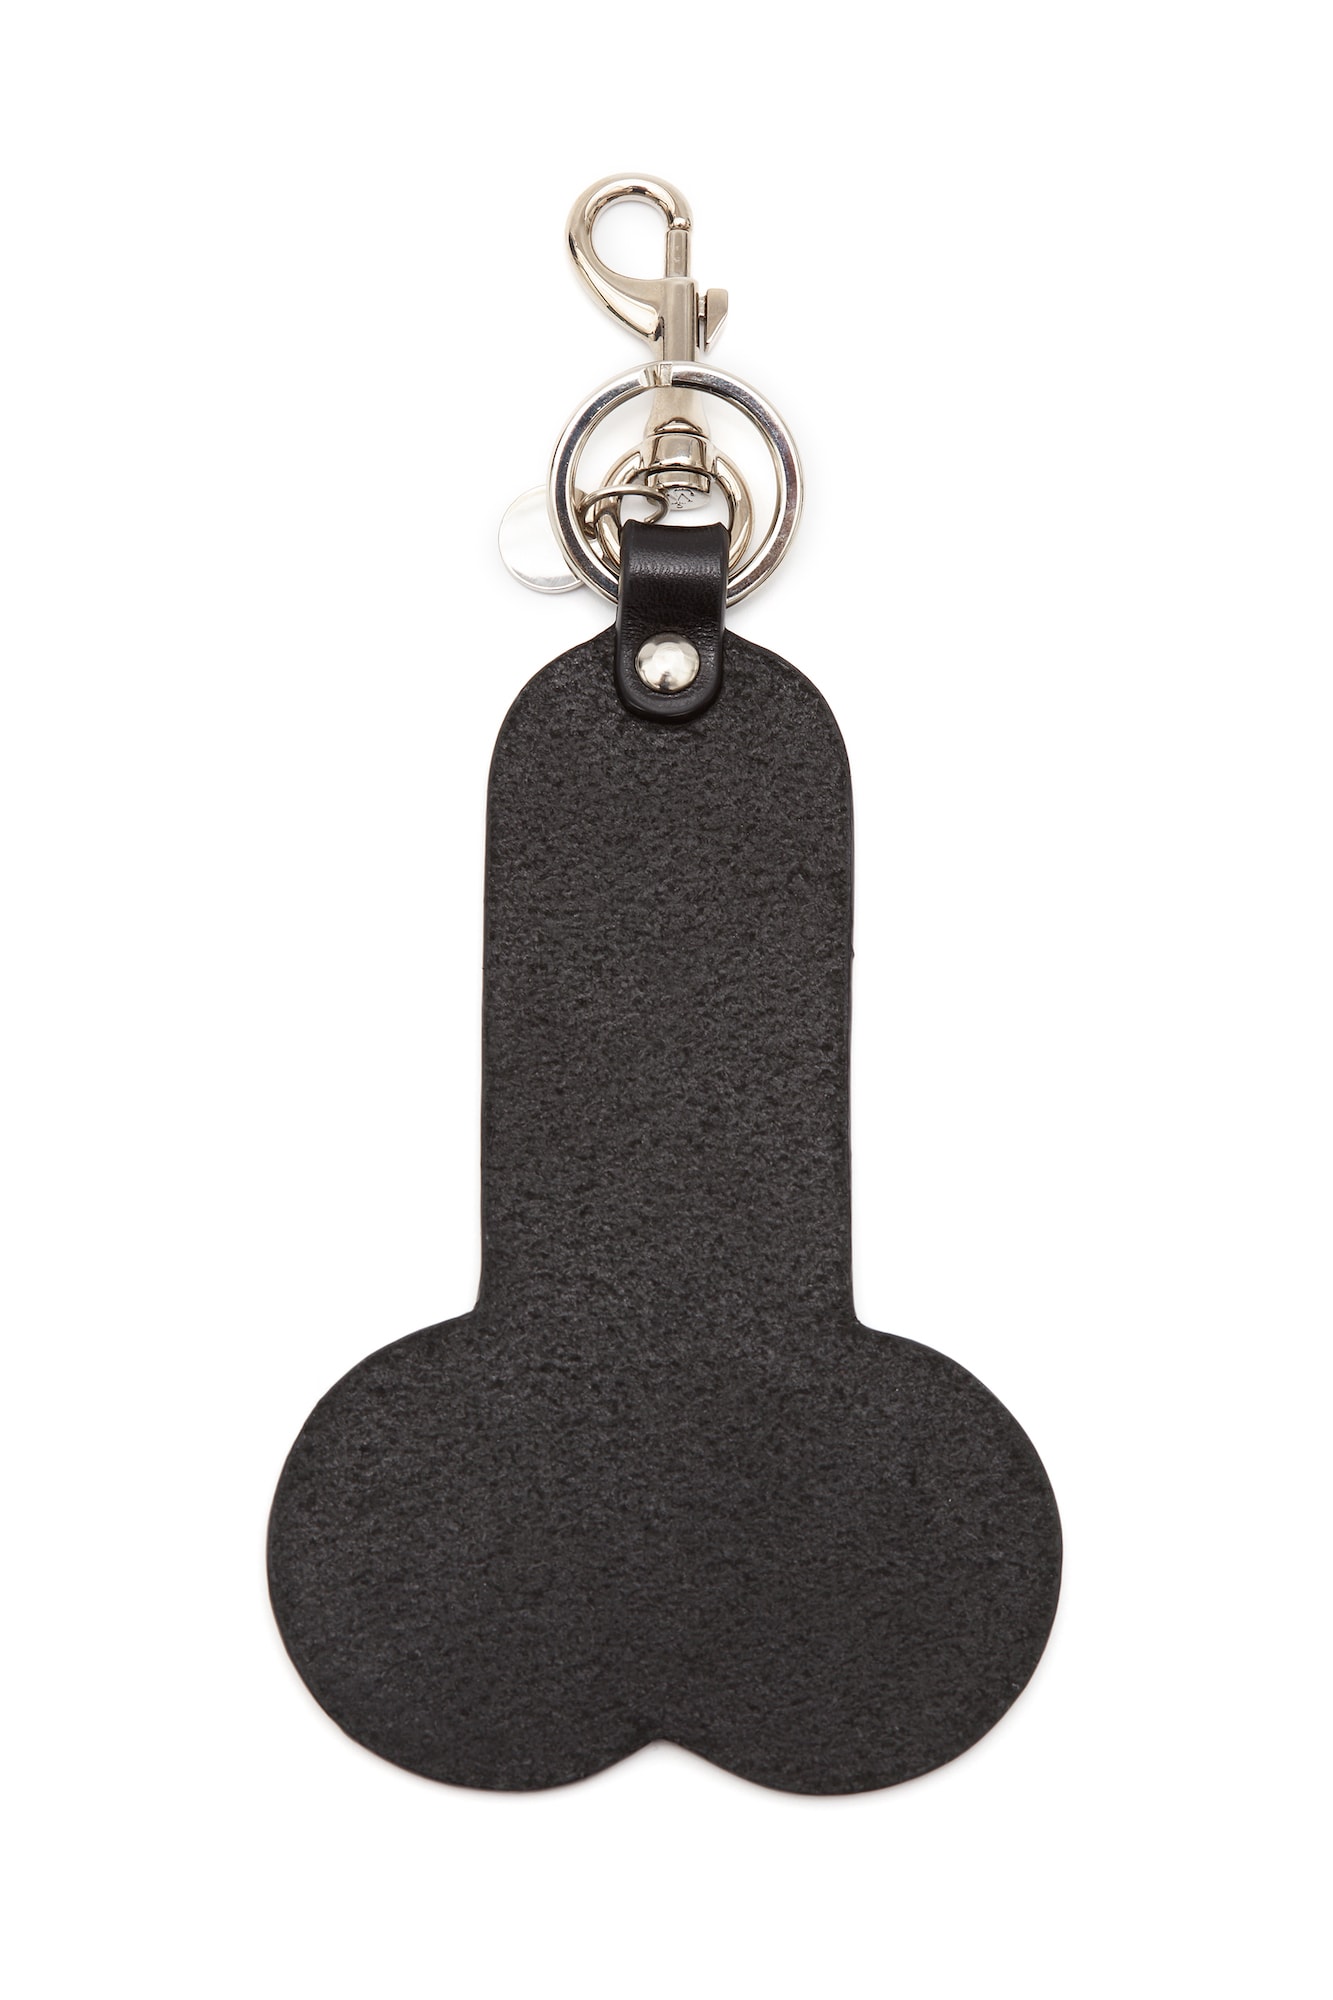 JW Anderson Made in Britain Capsule Collection Release Jonathan Anderson Eco-Conscious Materials London Penis Keychain 